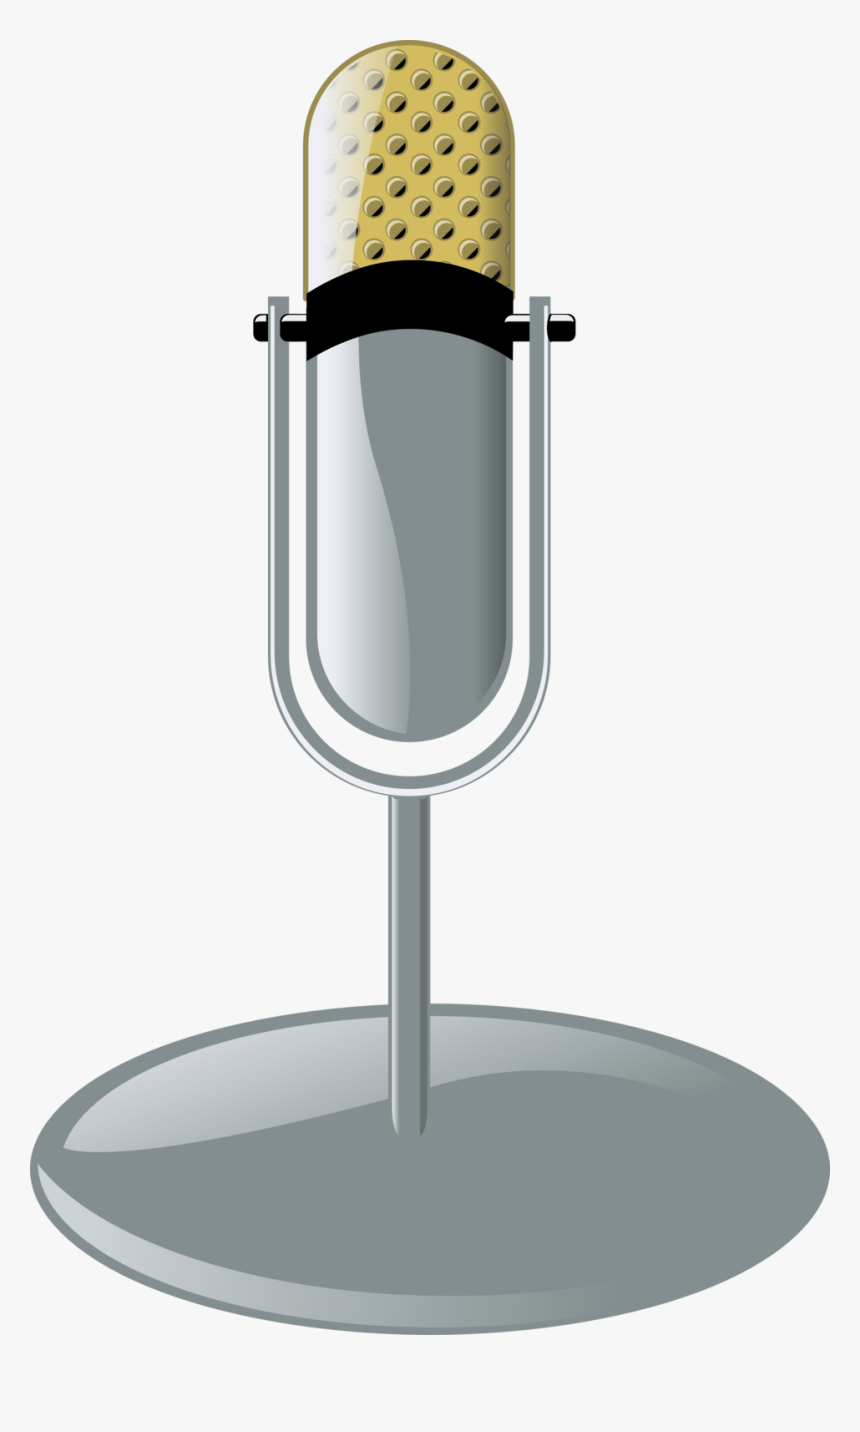 Old Microphone Png - Microphone Clip Art, Transparent Png, Free Download